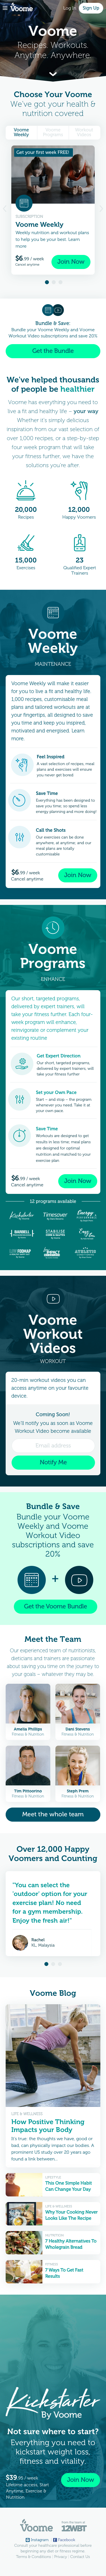 voome-mobile-01